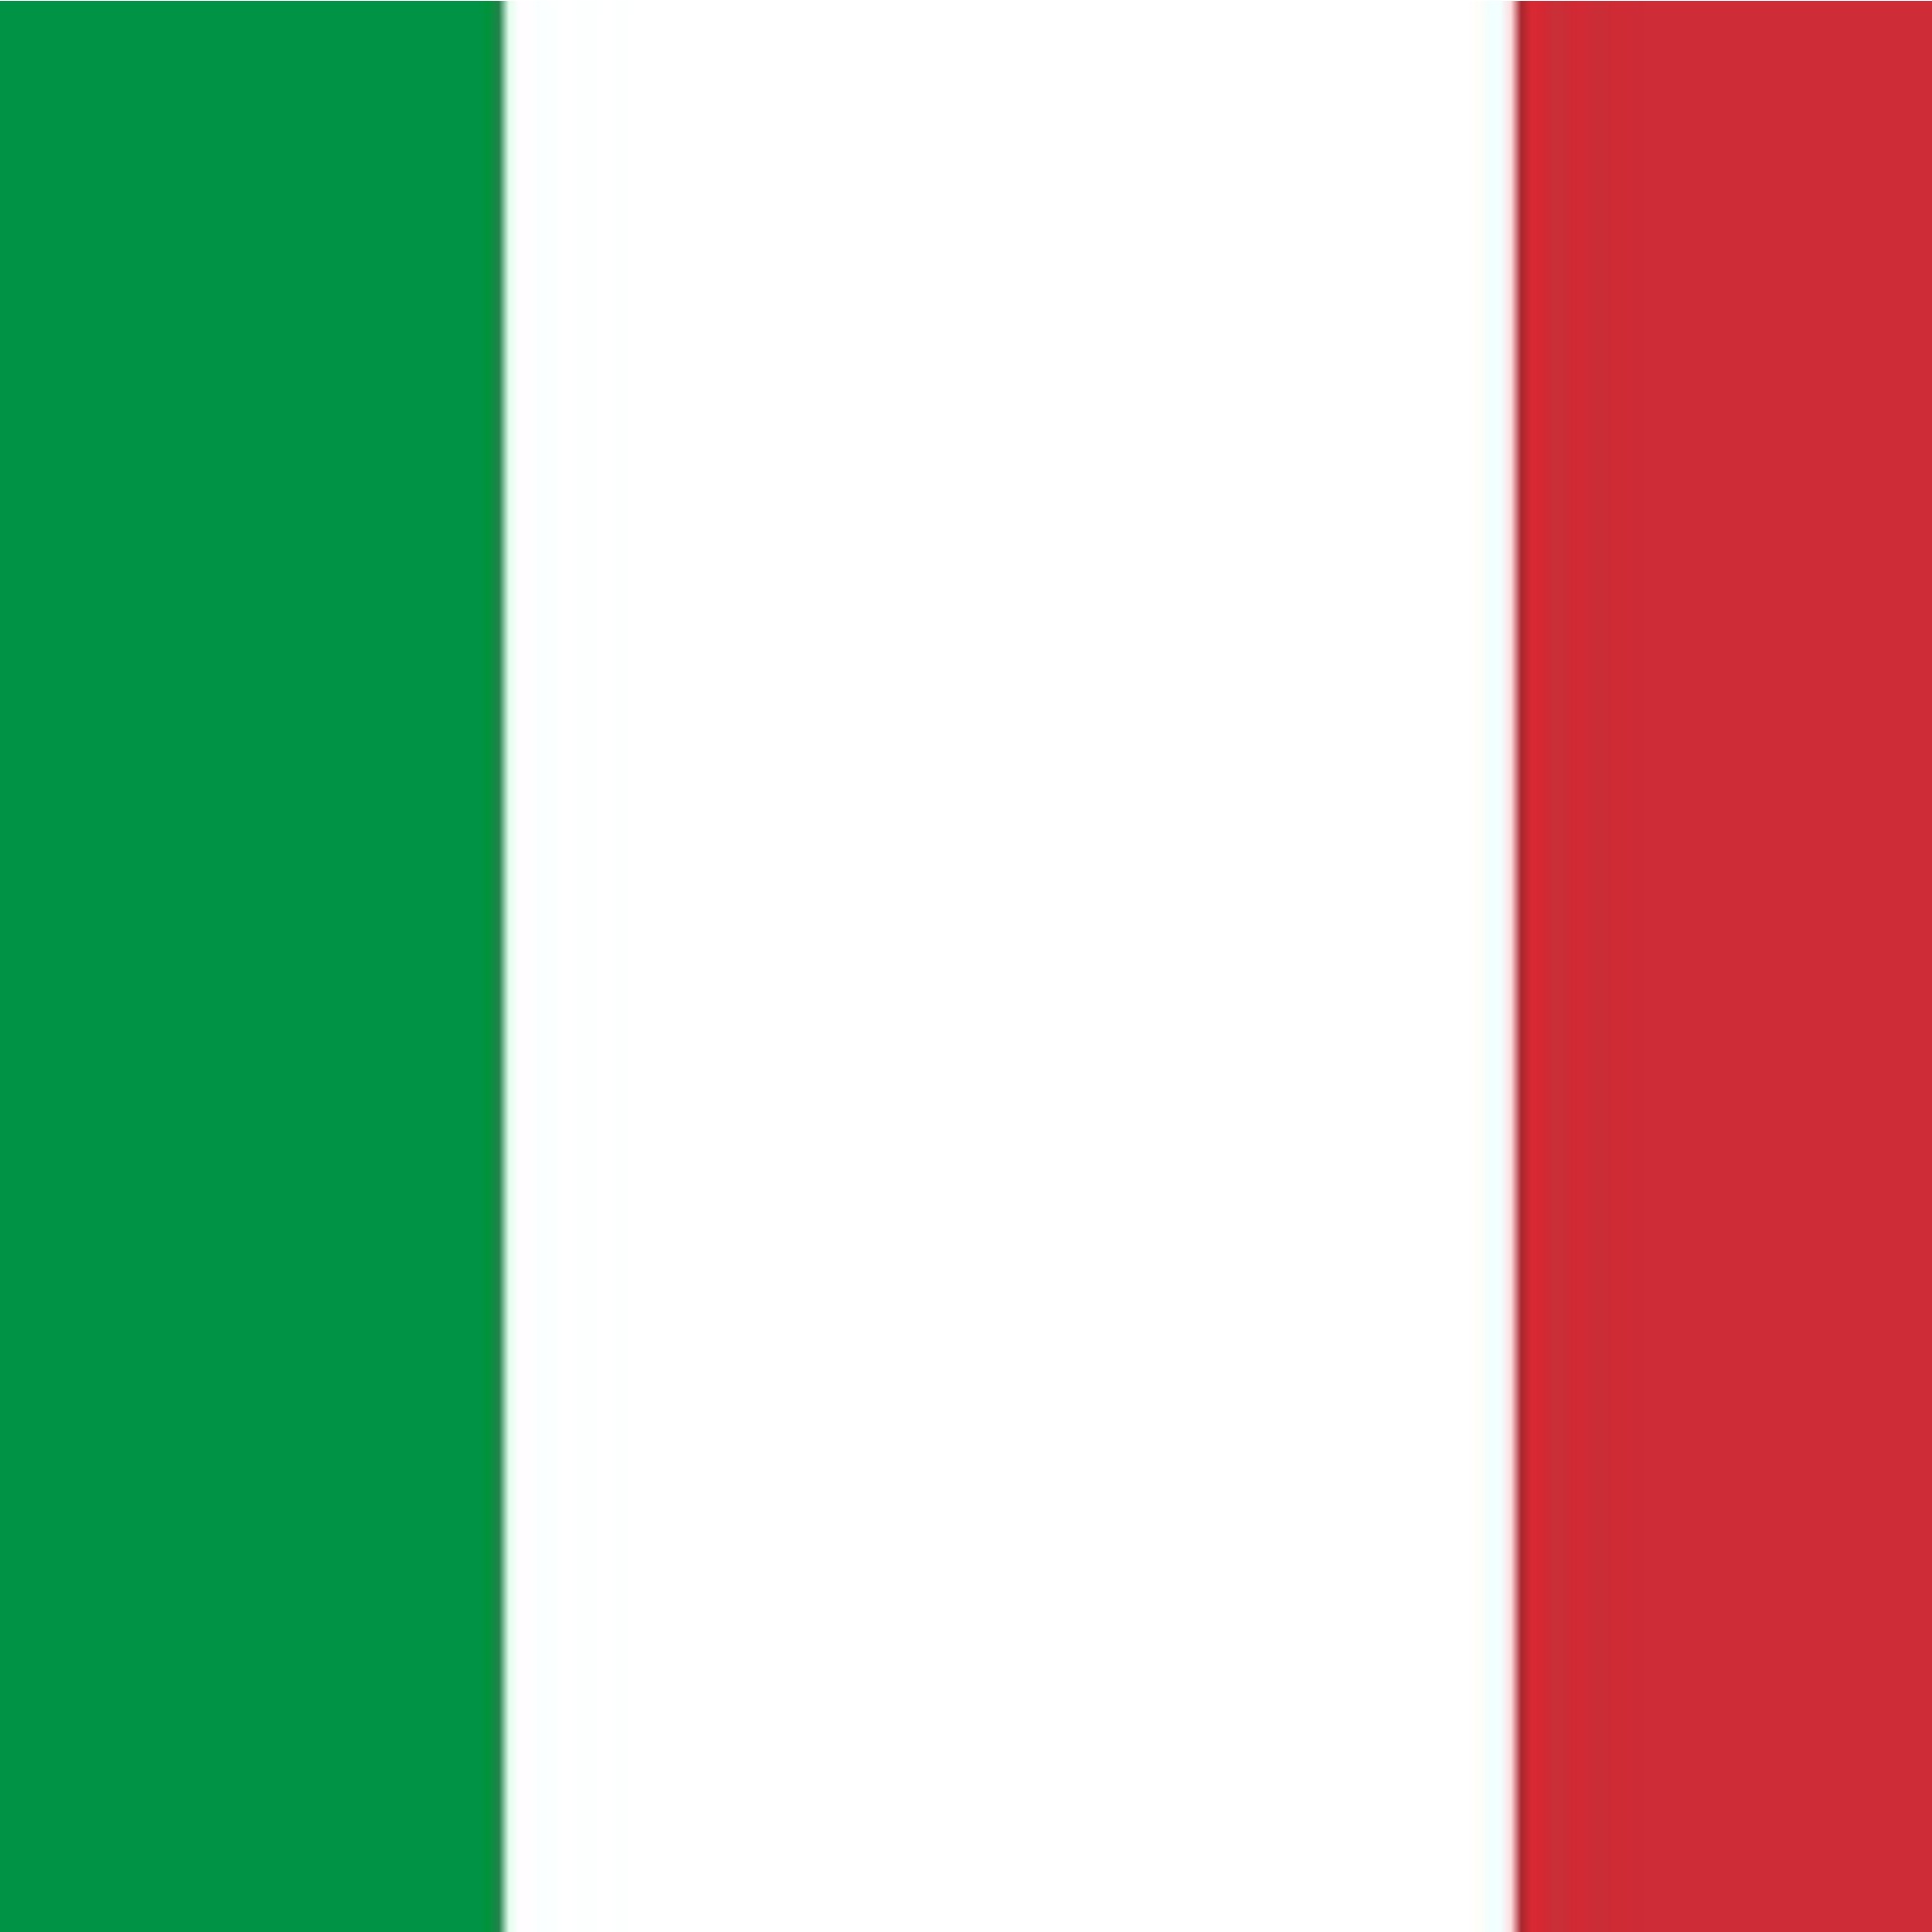 Honorary vice-consulate of Italy (Alicante) 